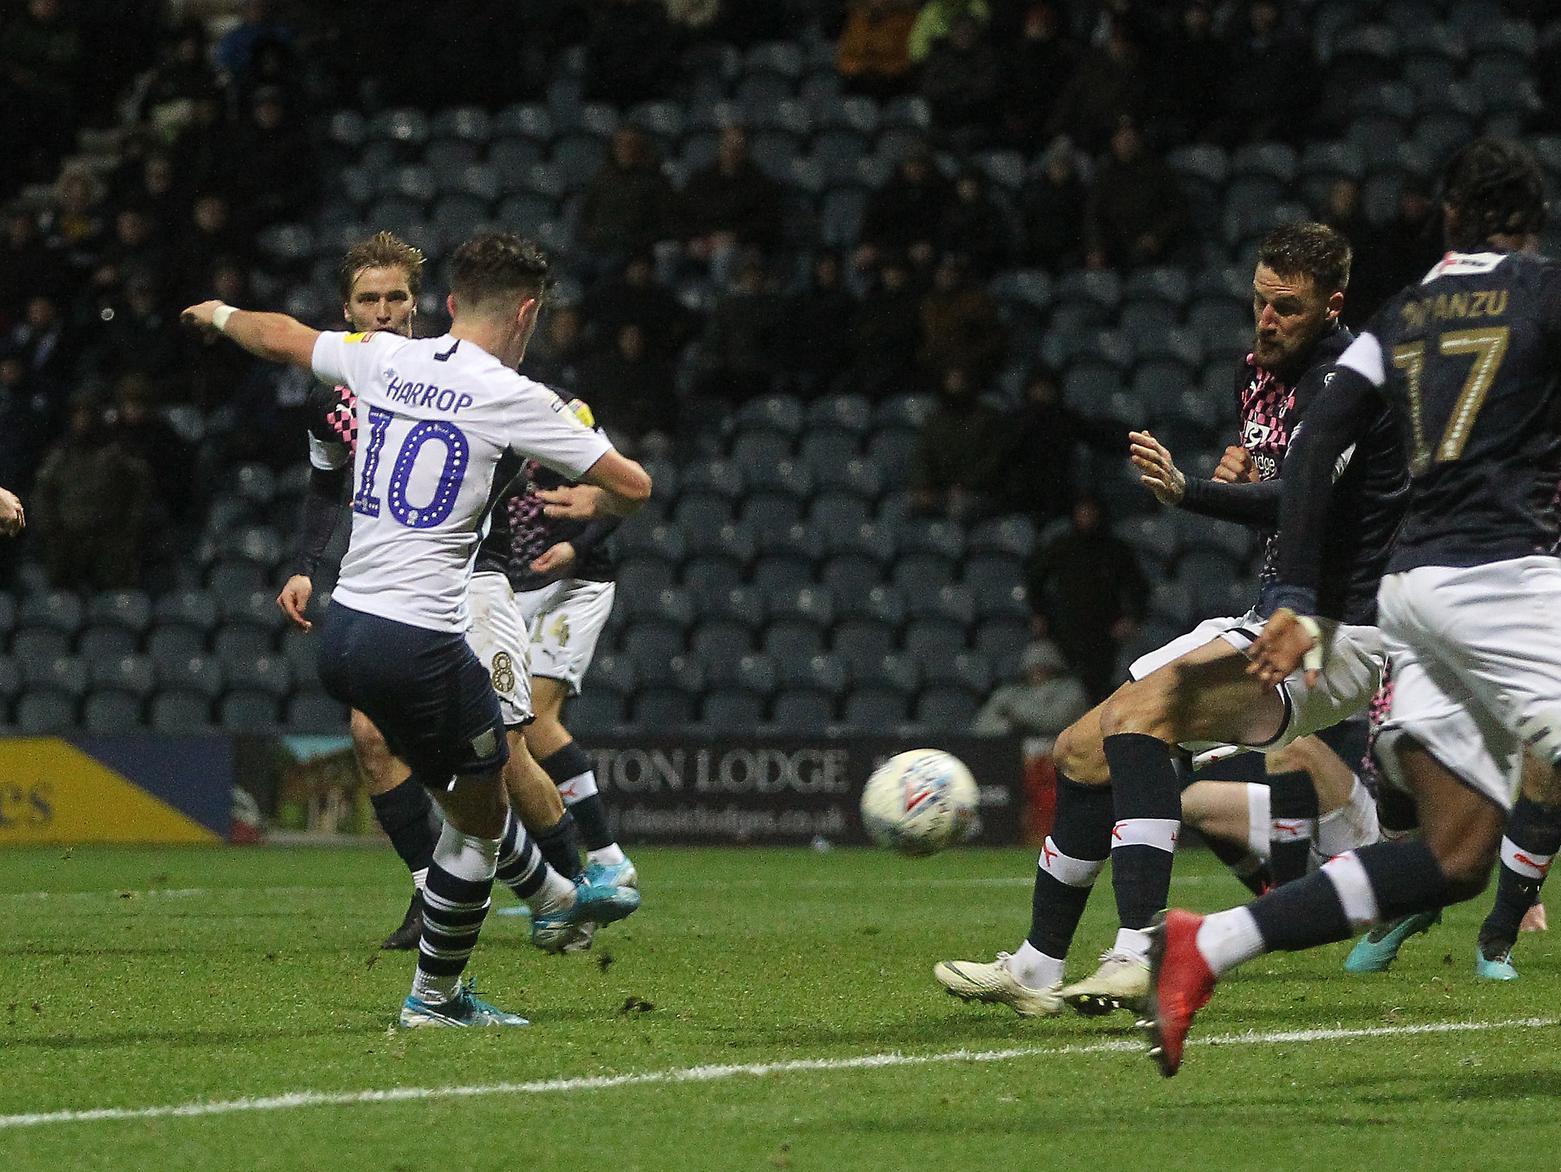 The attacking midfielder gave PNE extra energy and more creativity when he came on, caught the eye. A key introduction